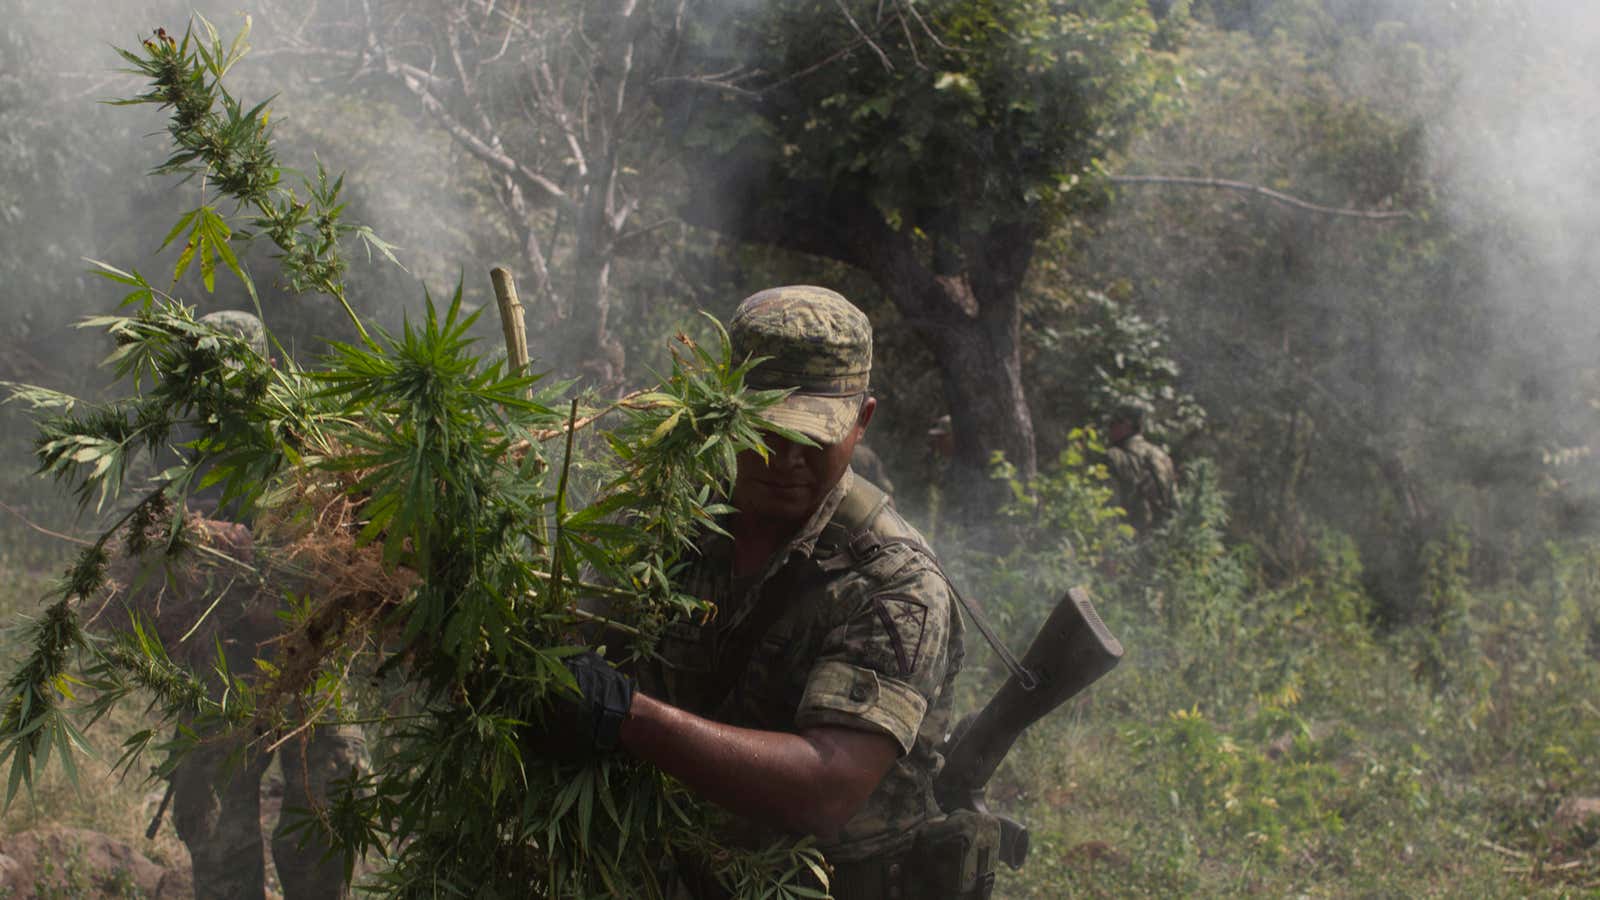 Can voters and free markets achieve what soldiers could not in the fight against drug trafficking?